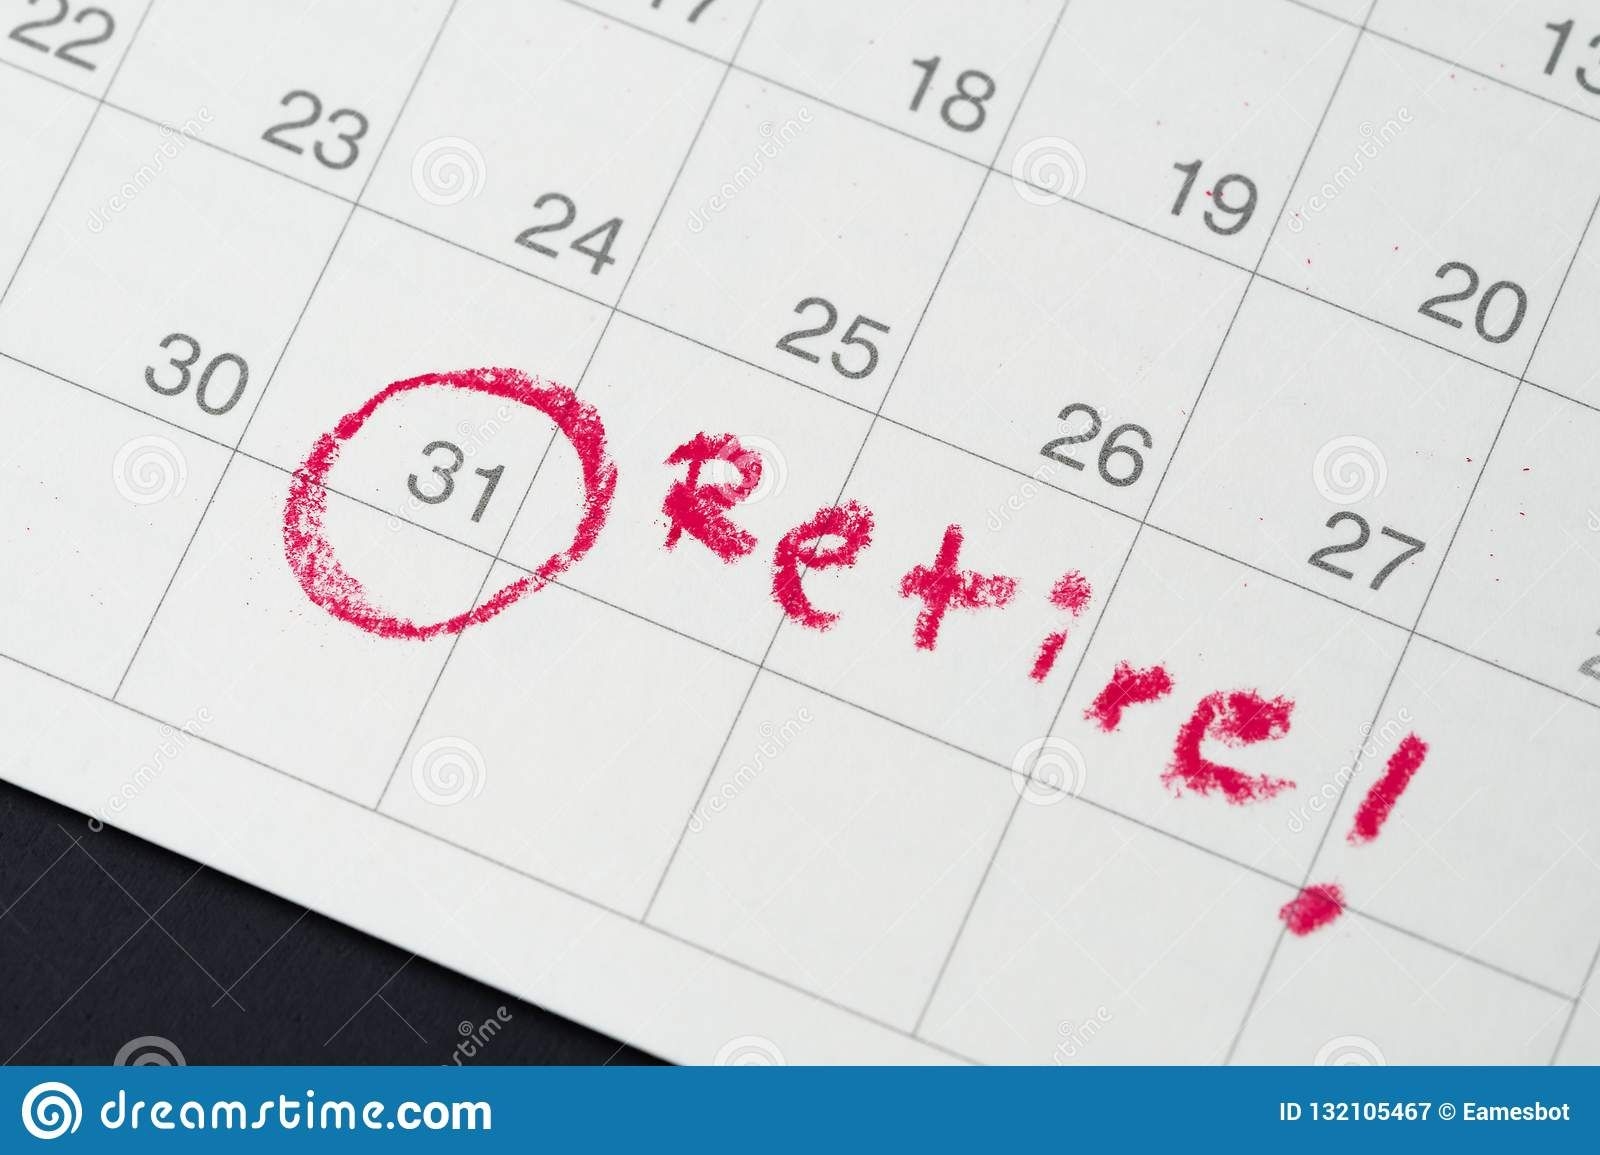 Retirement Goal Or Financial Freedom, Planning For Success